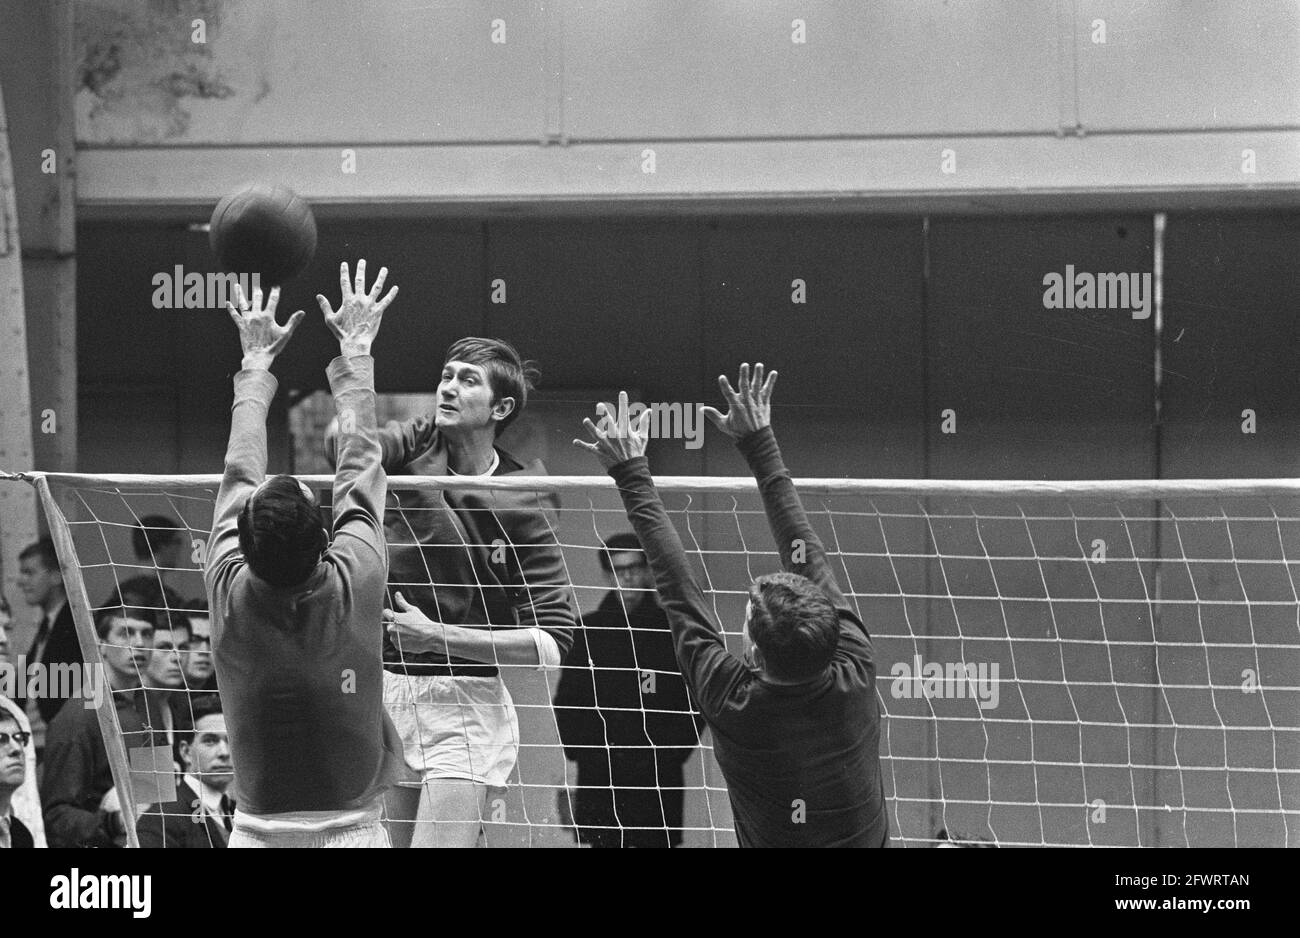 Student Championships, Volleyball, Constandse gives smash, 20, 1966, Students, VOLLEYBAL, championships, The Netherlands, 20th century press agency photo, news to remember, documentary, historic photography 1945-1990, visual stories ...